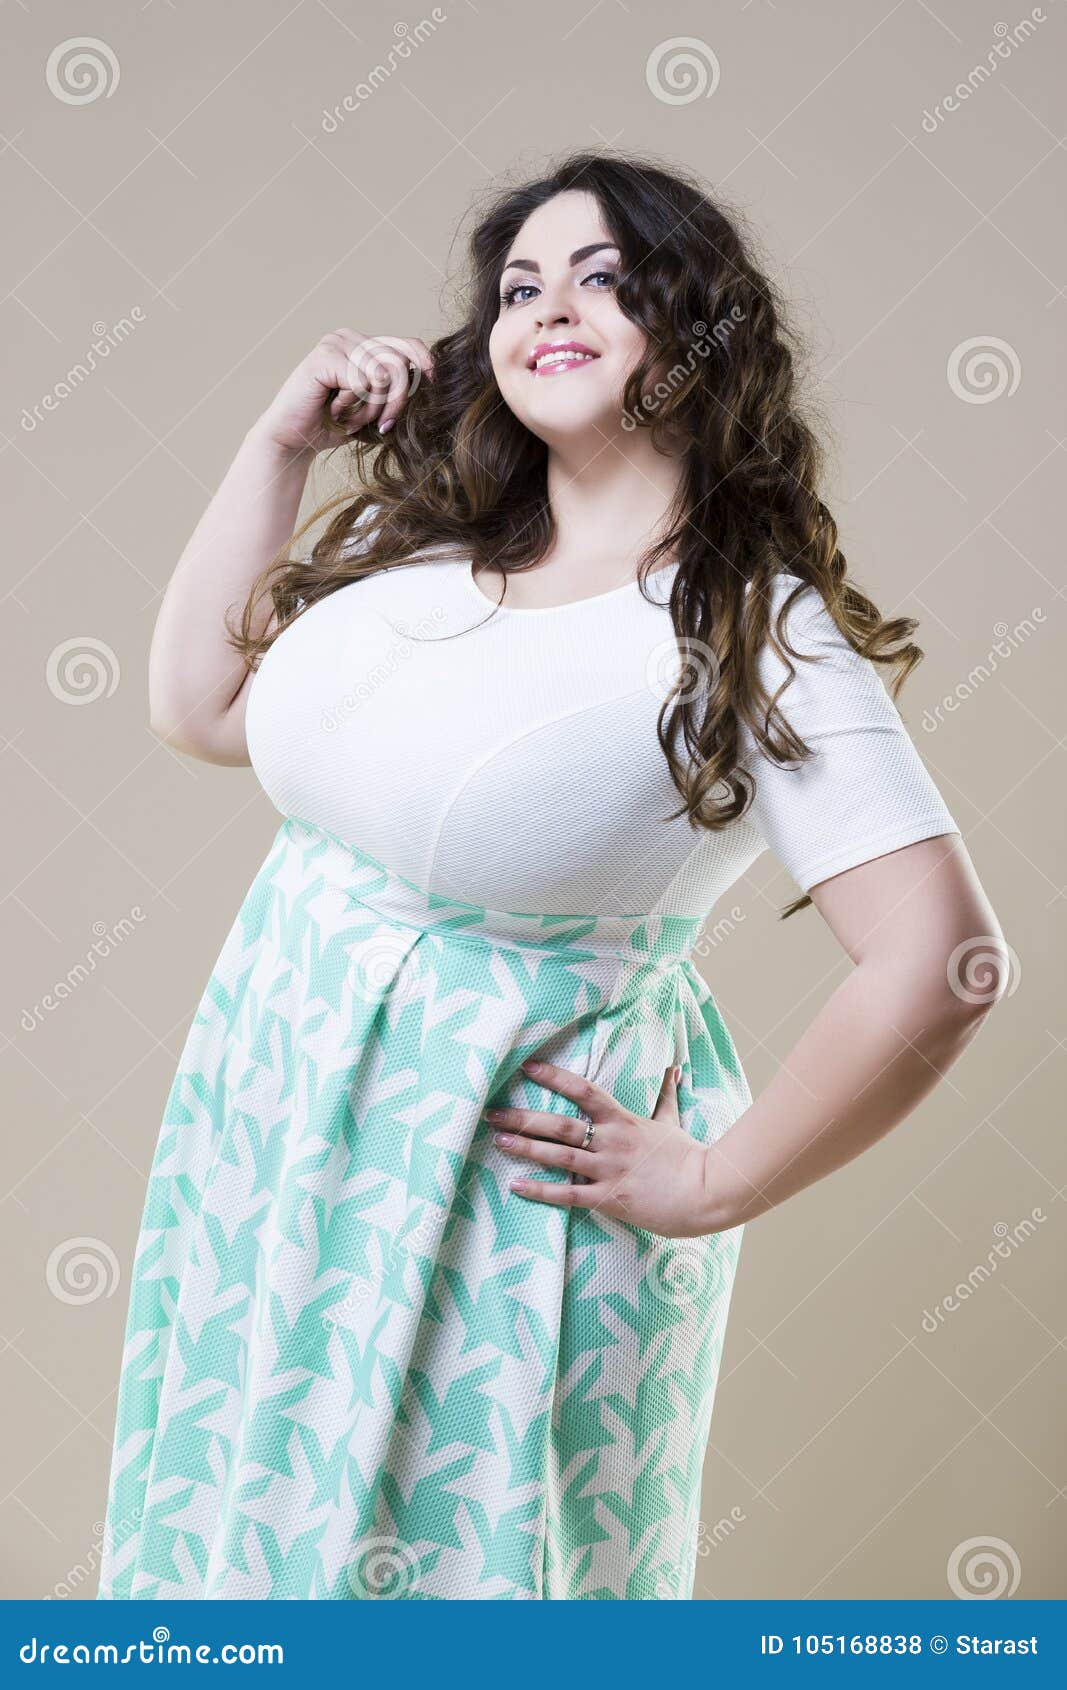 What size is a bbw